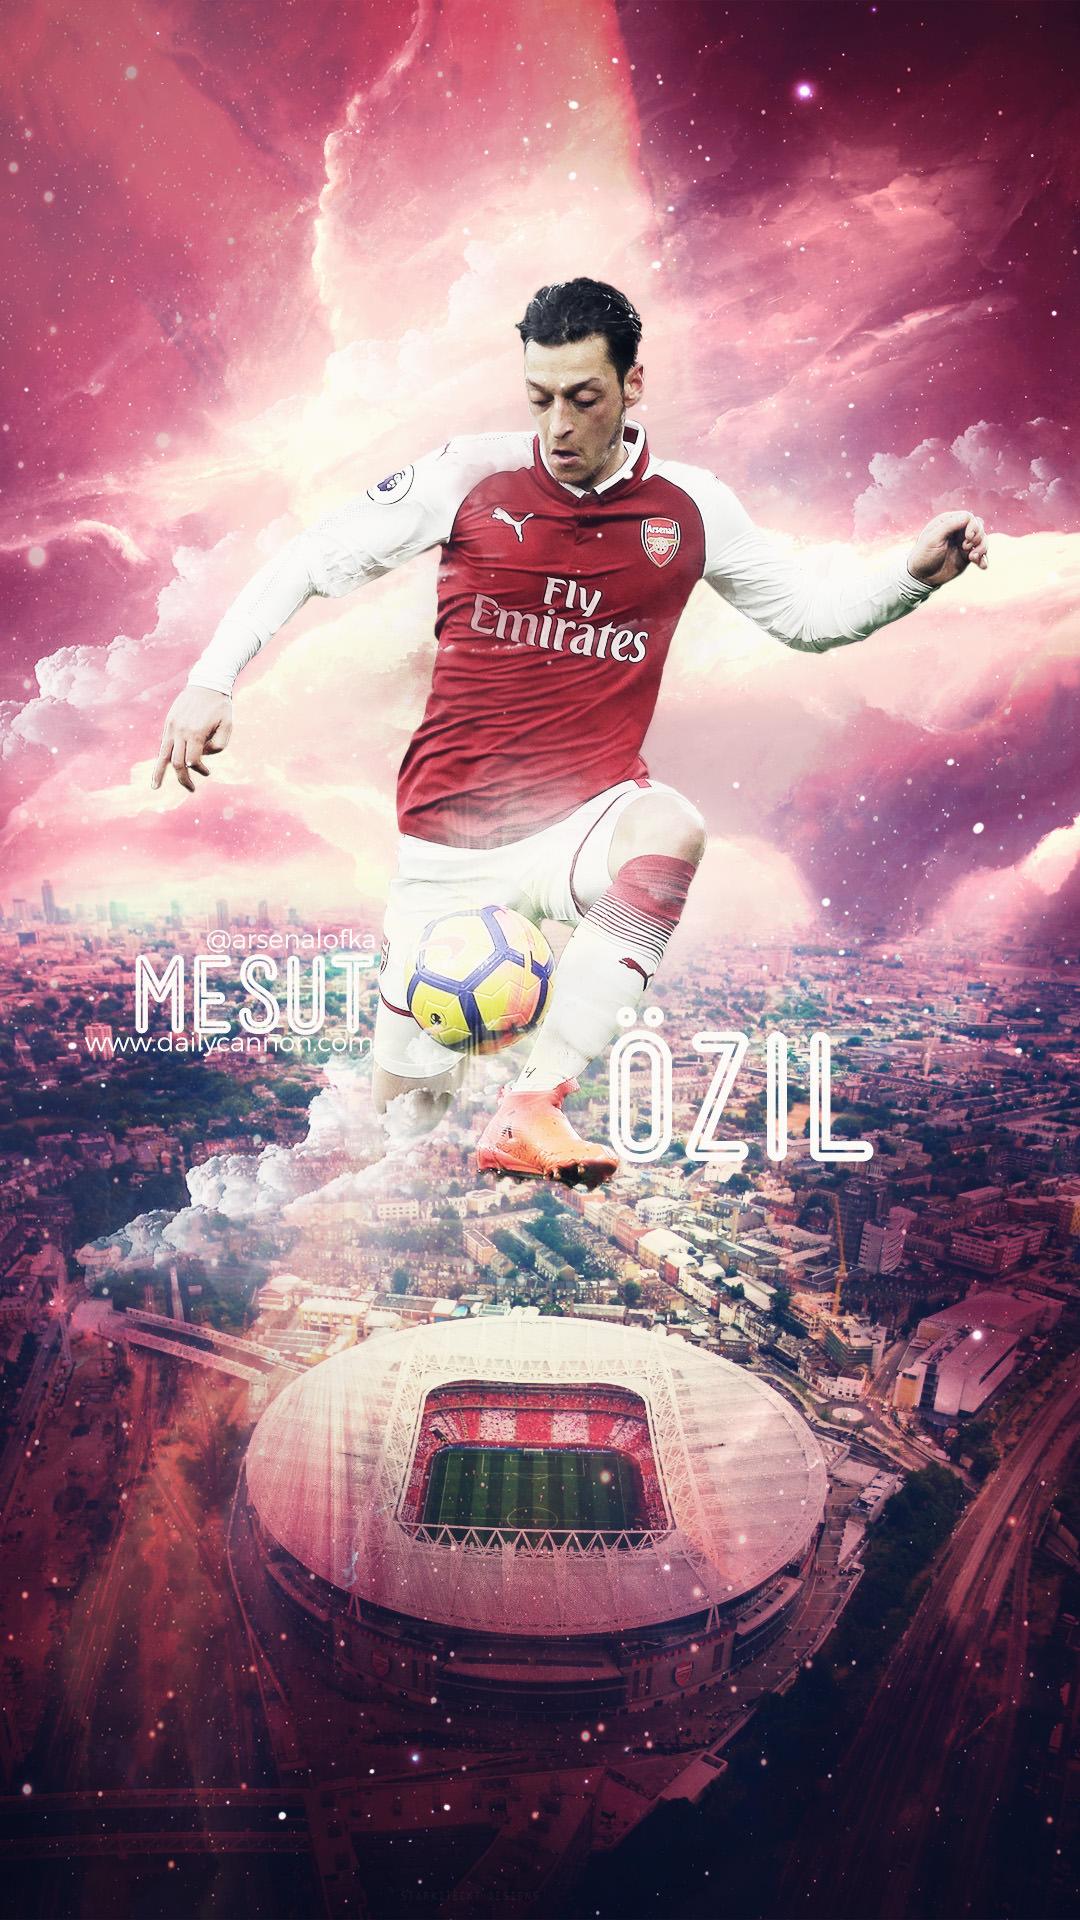 Immense Mesut Ozil wallpaper after an immense performance against